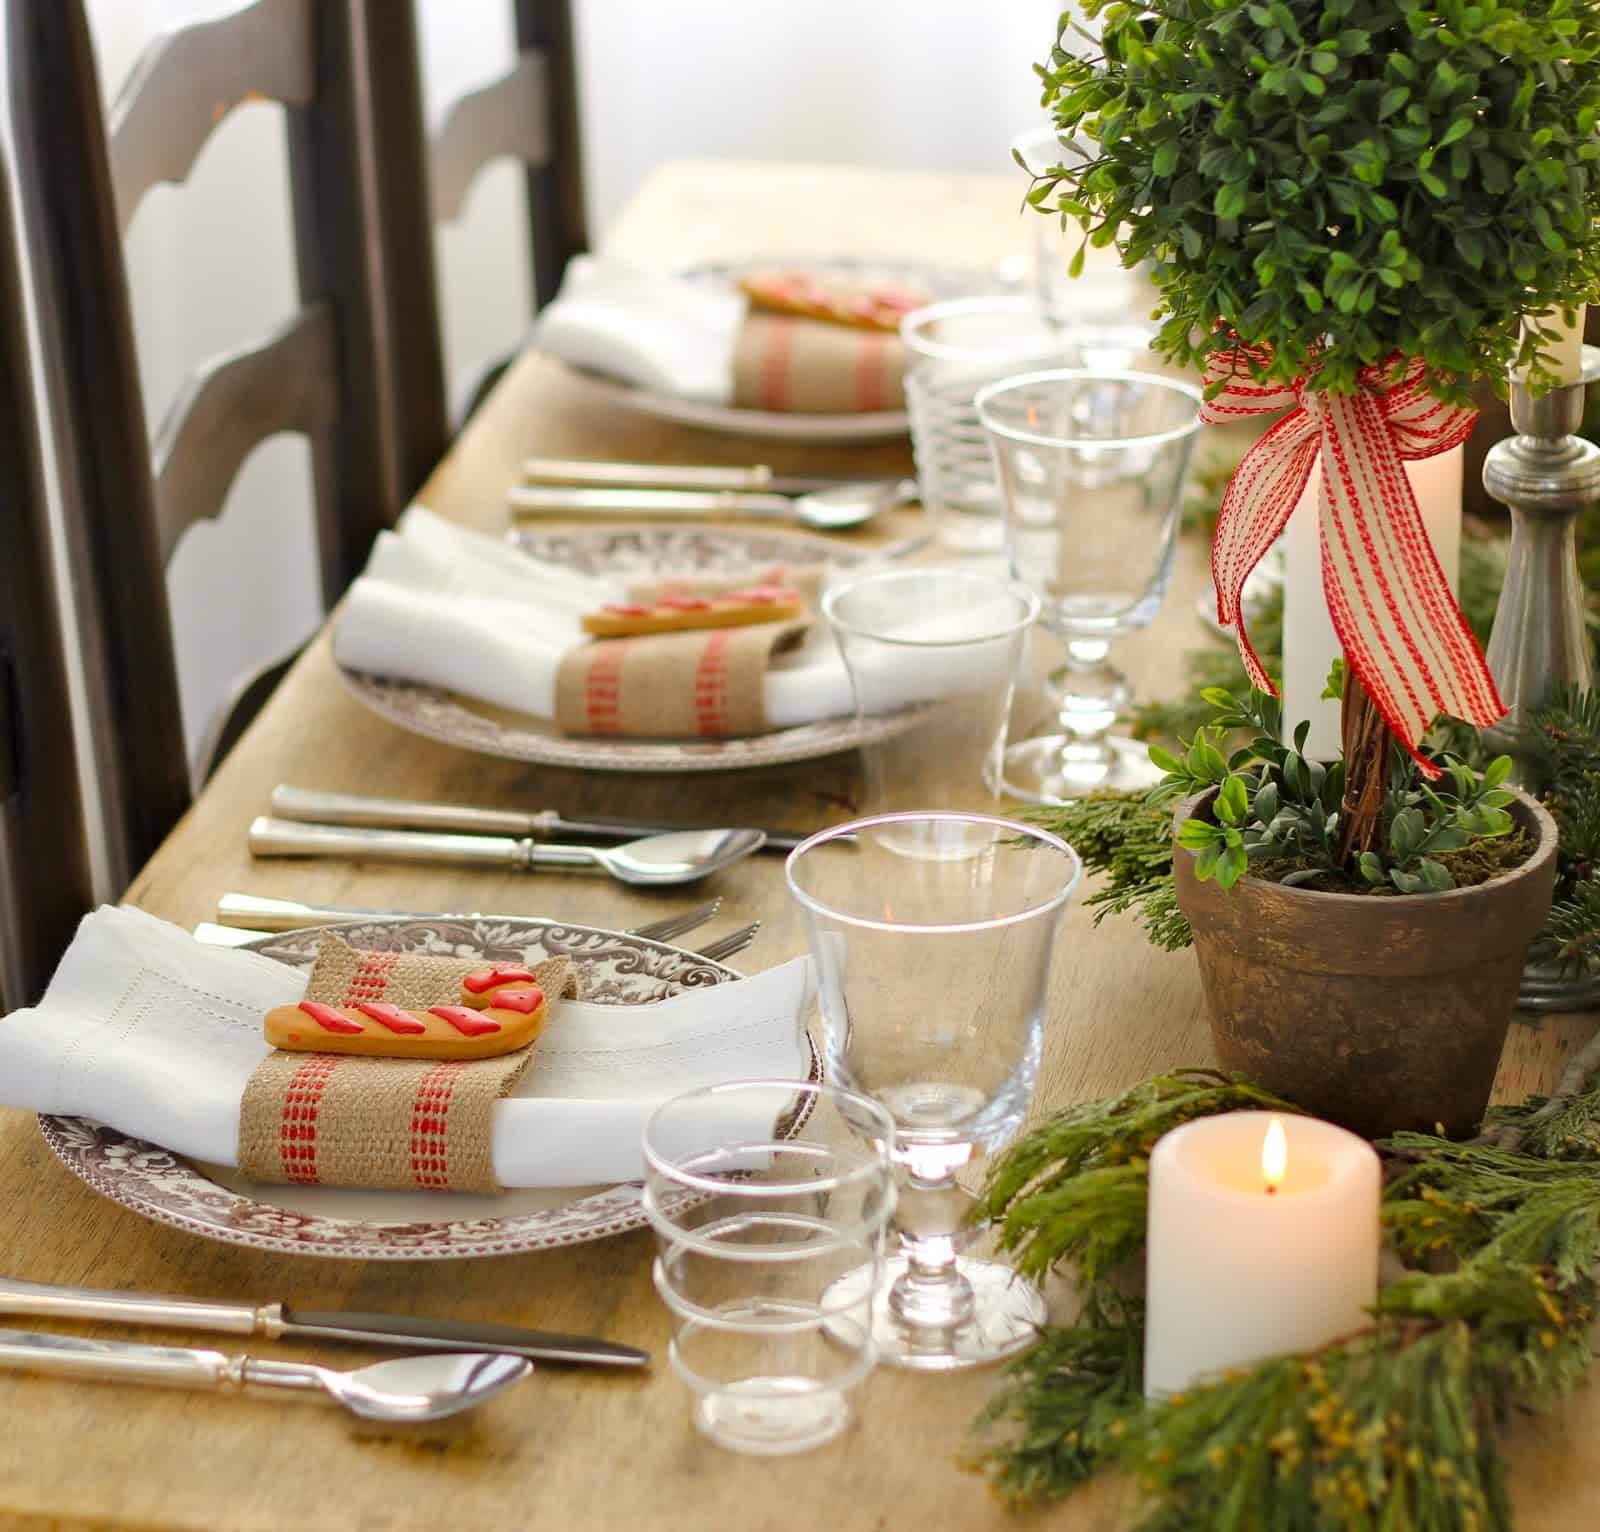 Beautiful DIY Holiday Centerpieces and Table Setting